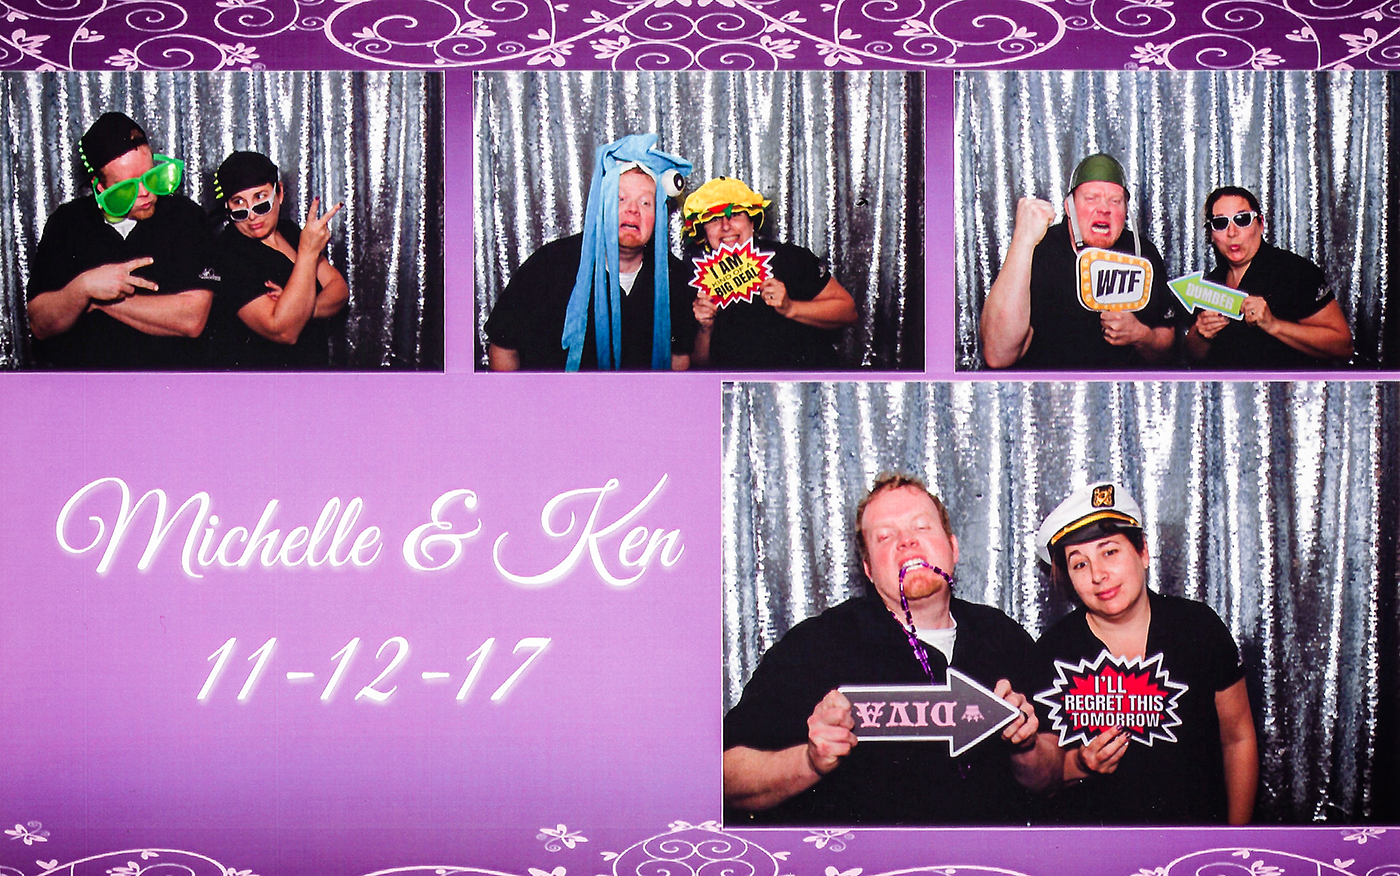 All Occasions Photography Albany NY - Wedding Photography Funny Photobooth Collage Against Silver Backdrop